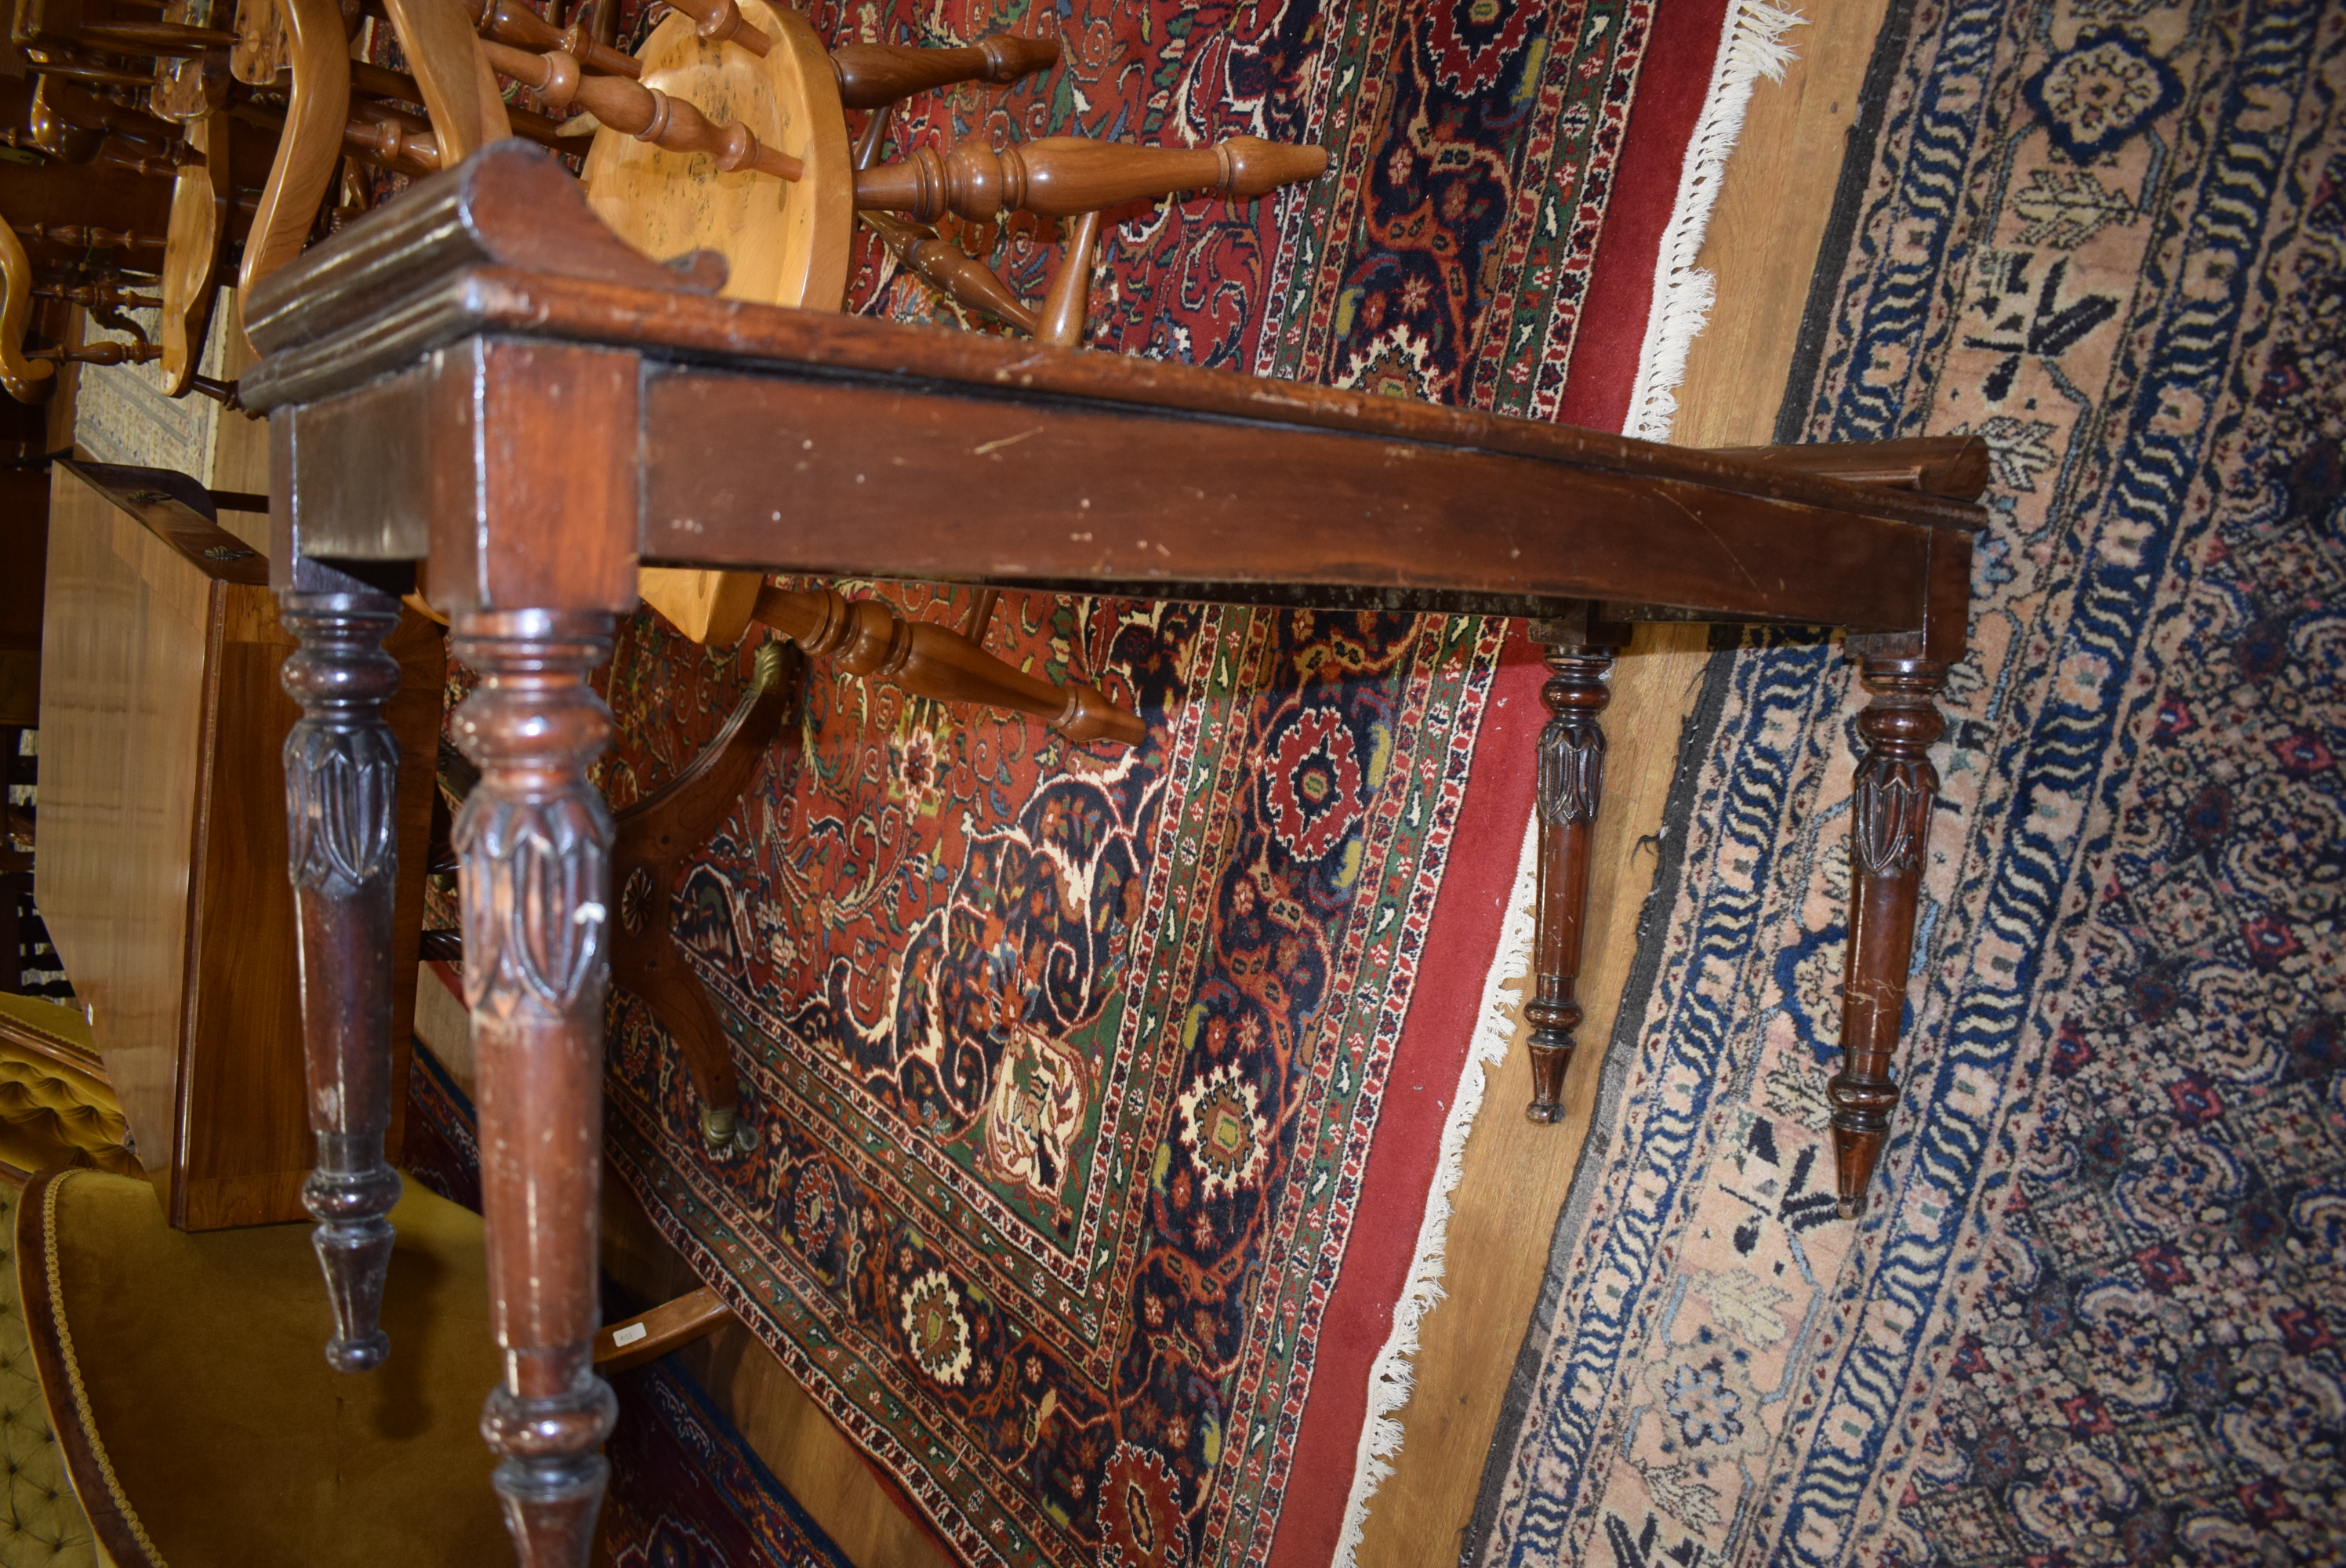 A late 19th century mahogany window seat with scrolled ends and turned legs with acanthus-leaf caps - Image 20 of 20